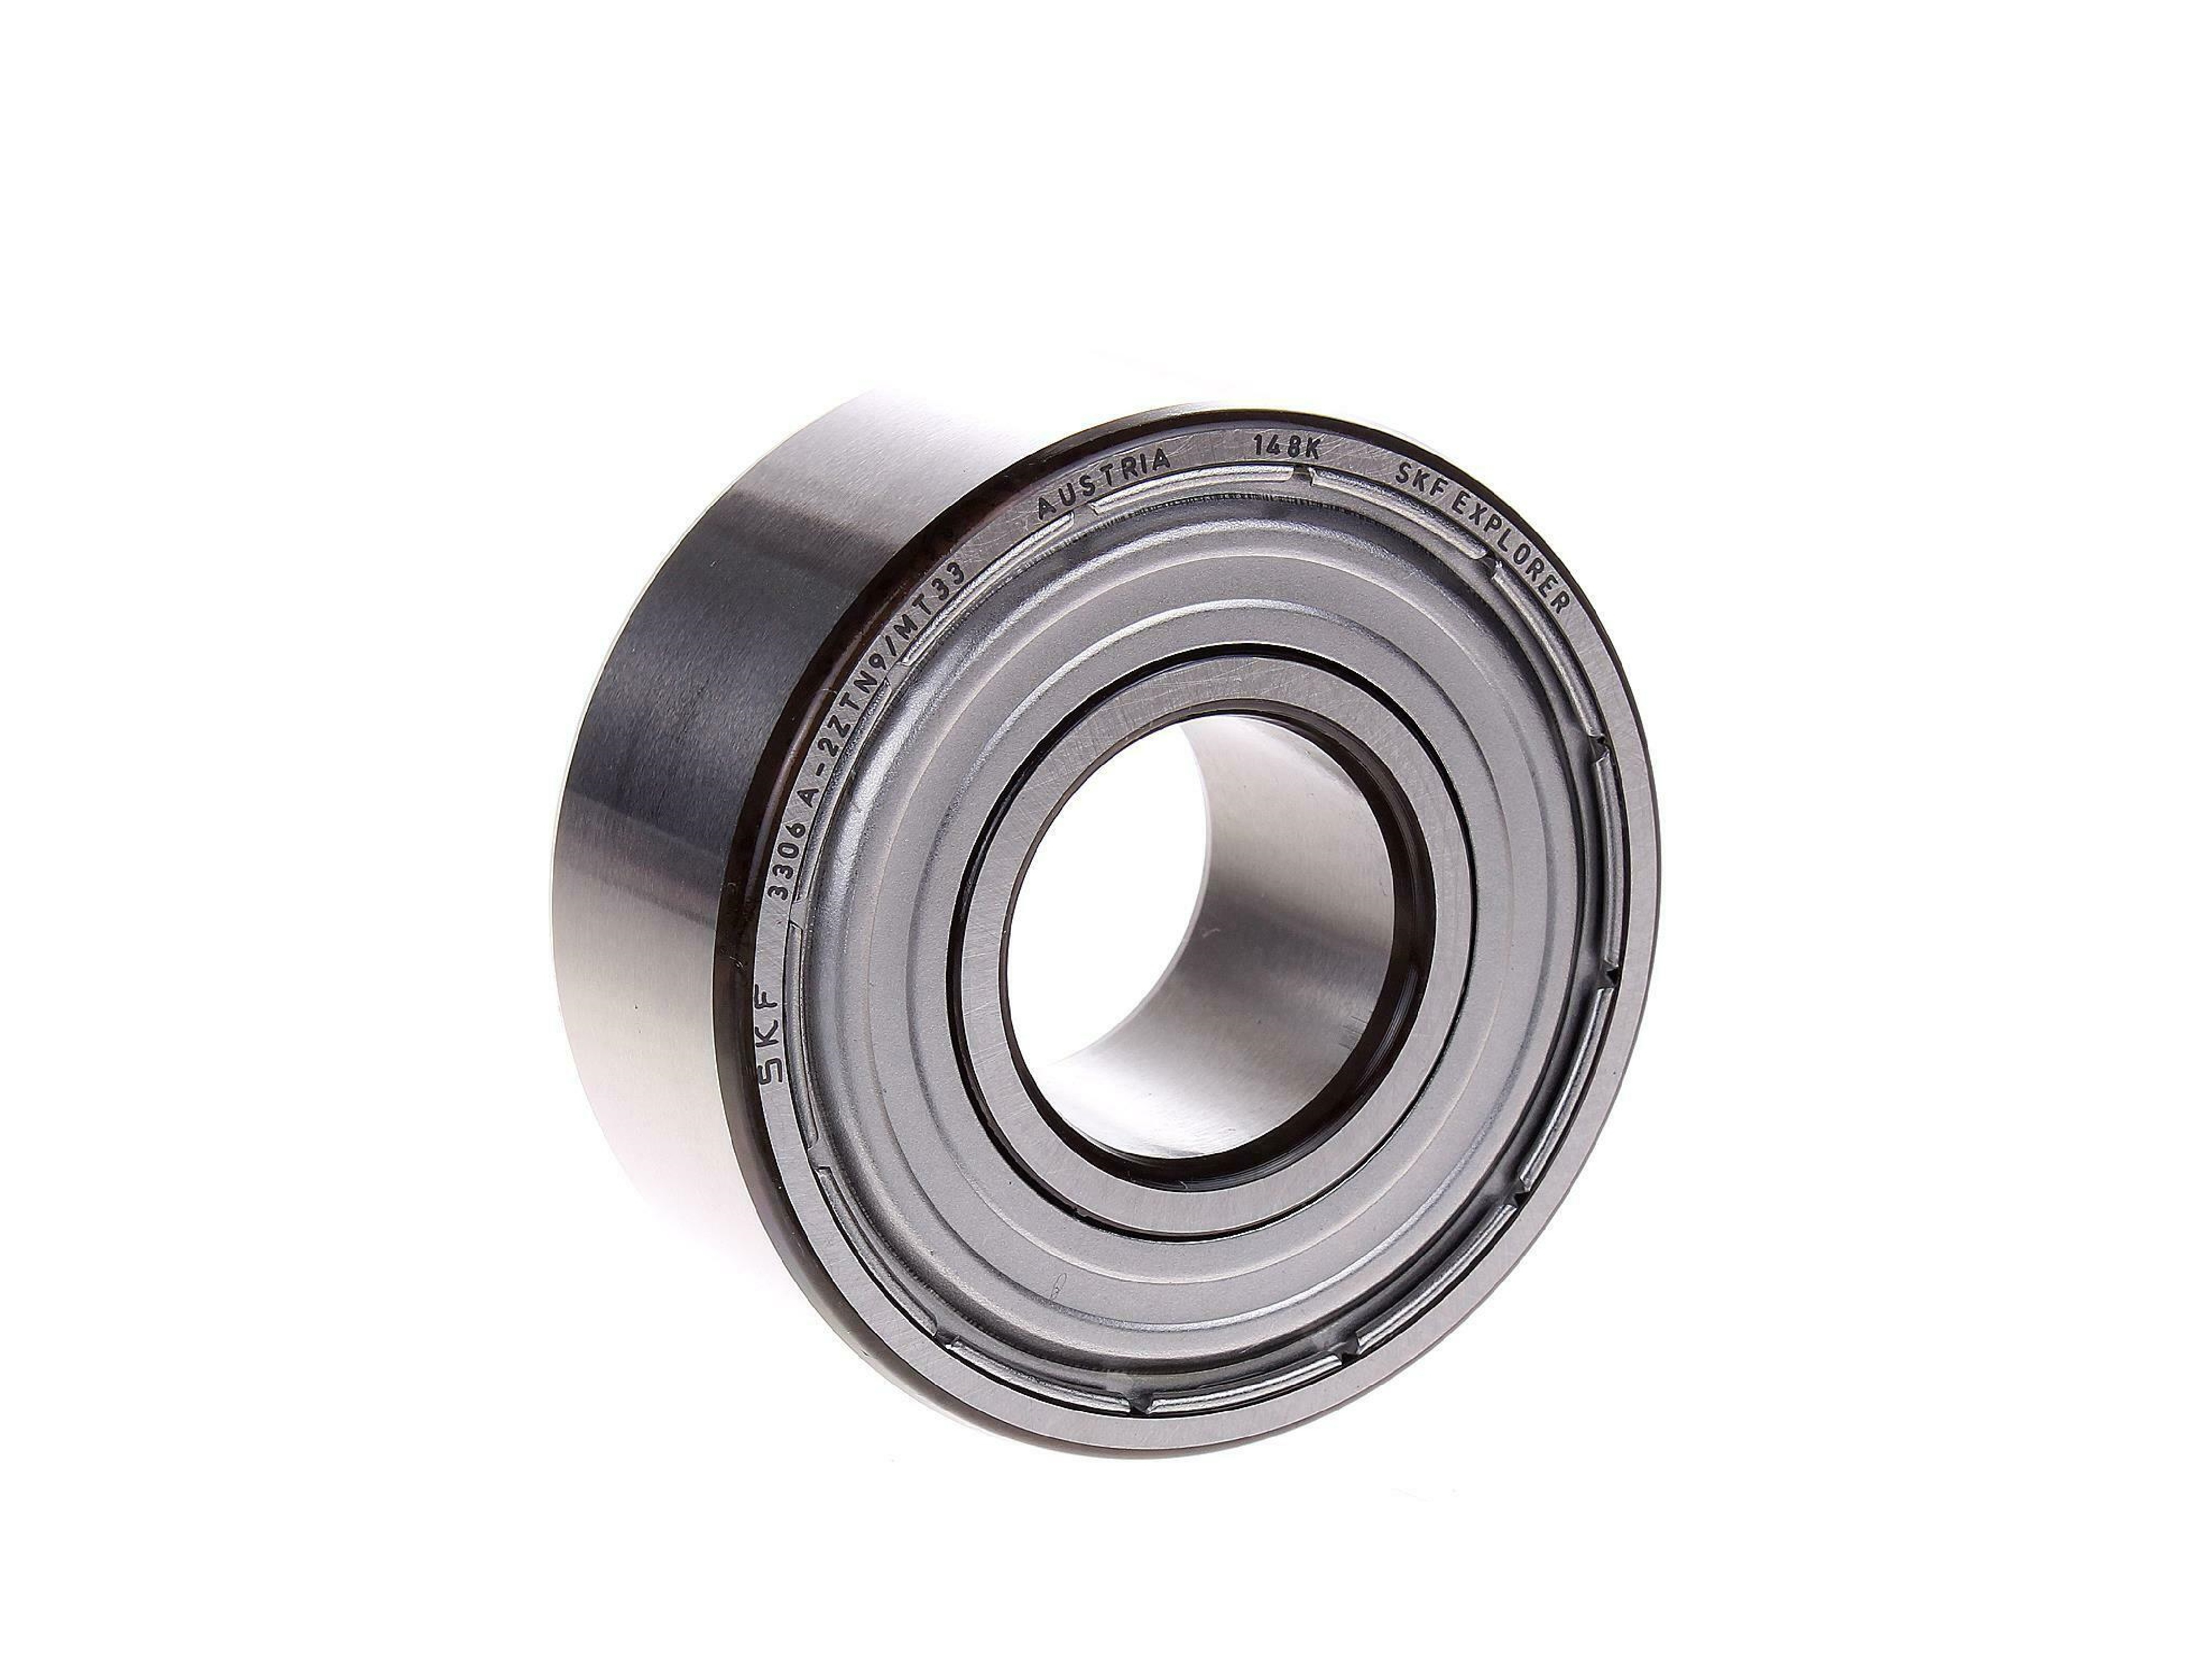 3311A-2Z/C3MT33 SKF Double Row Angular Contact Ball Bearing - Shielded 55mm x 120mm x 49.2mm